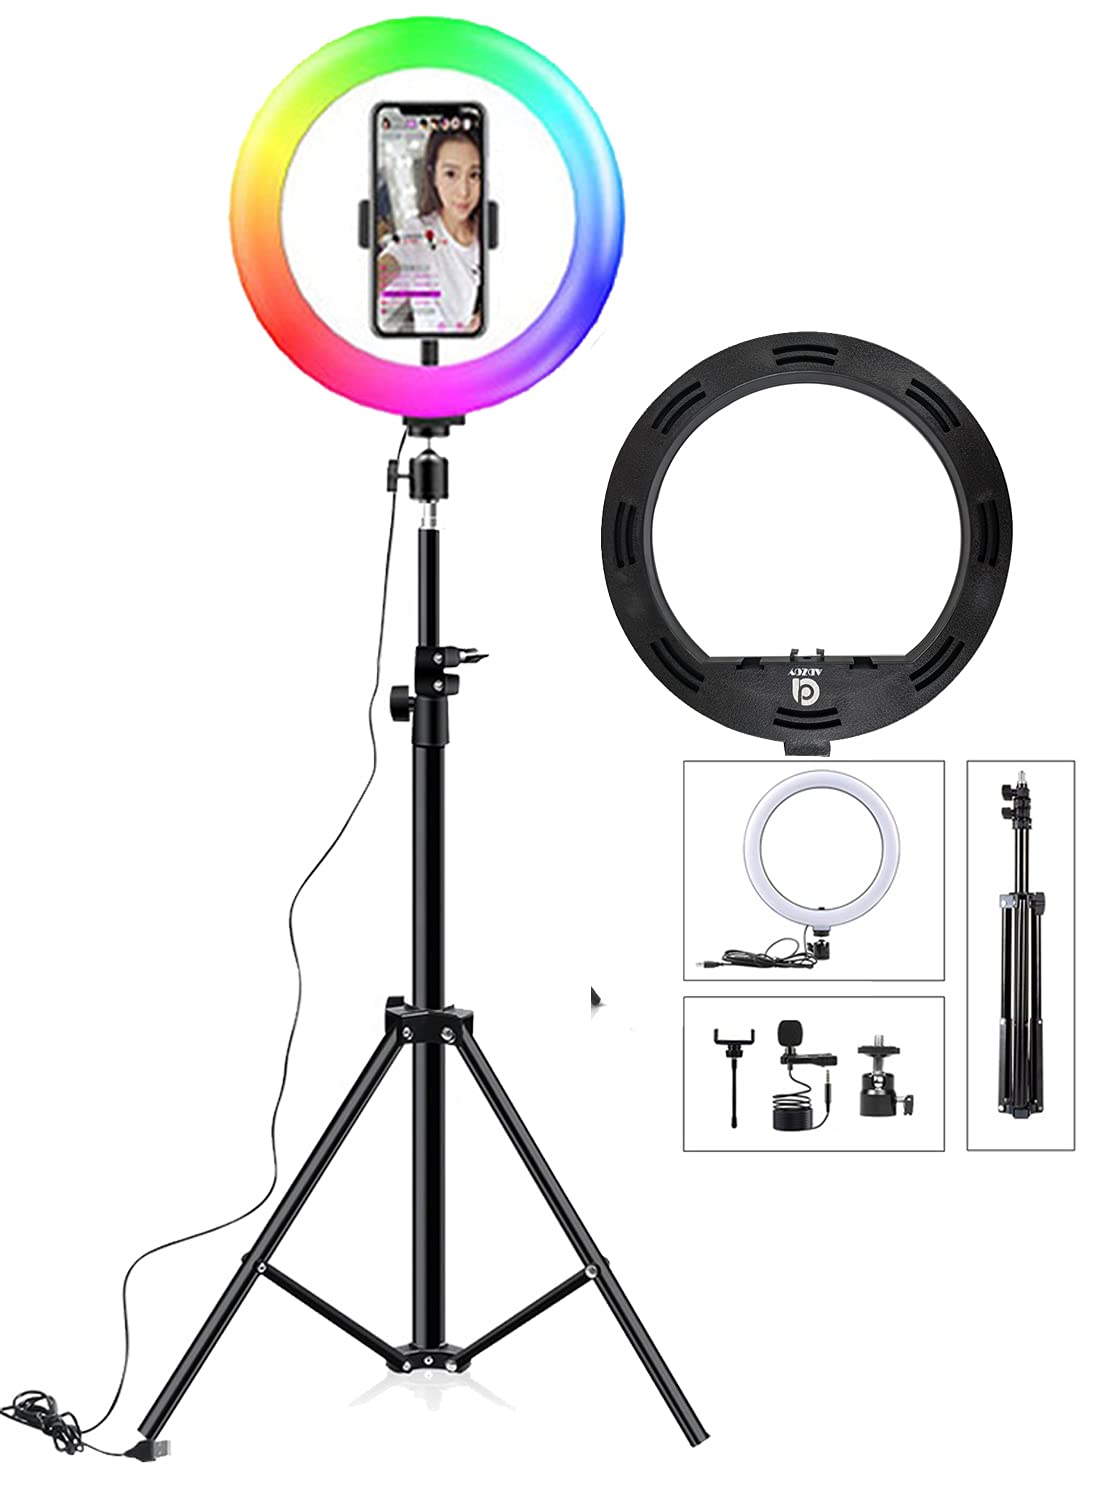 ADZOY Premium Combo of 10" RGB Selfie Light (3 Light Modes) with 6.9ft Tripod & Collar Mic for Your Personal and Professional Video Shoot